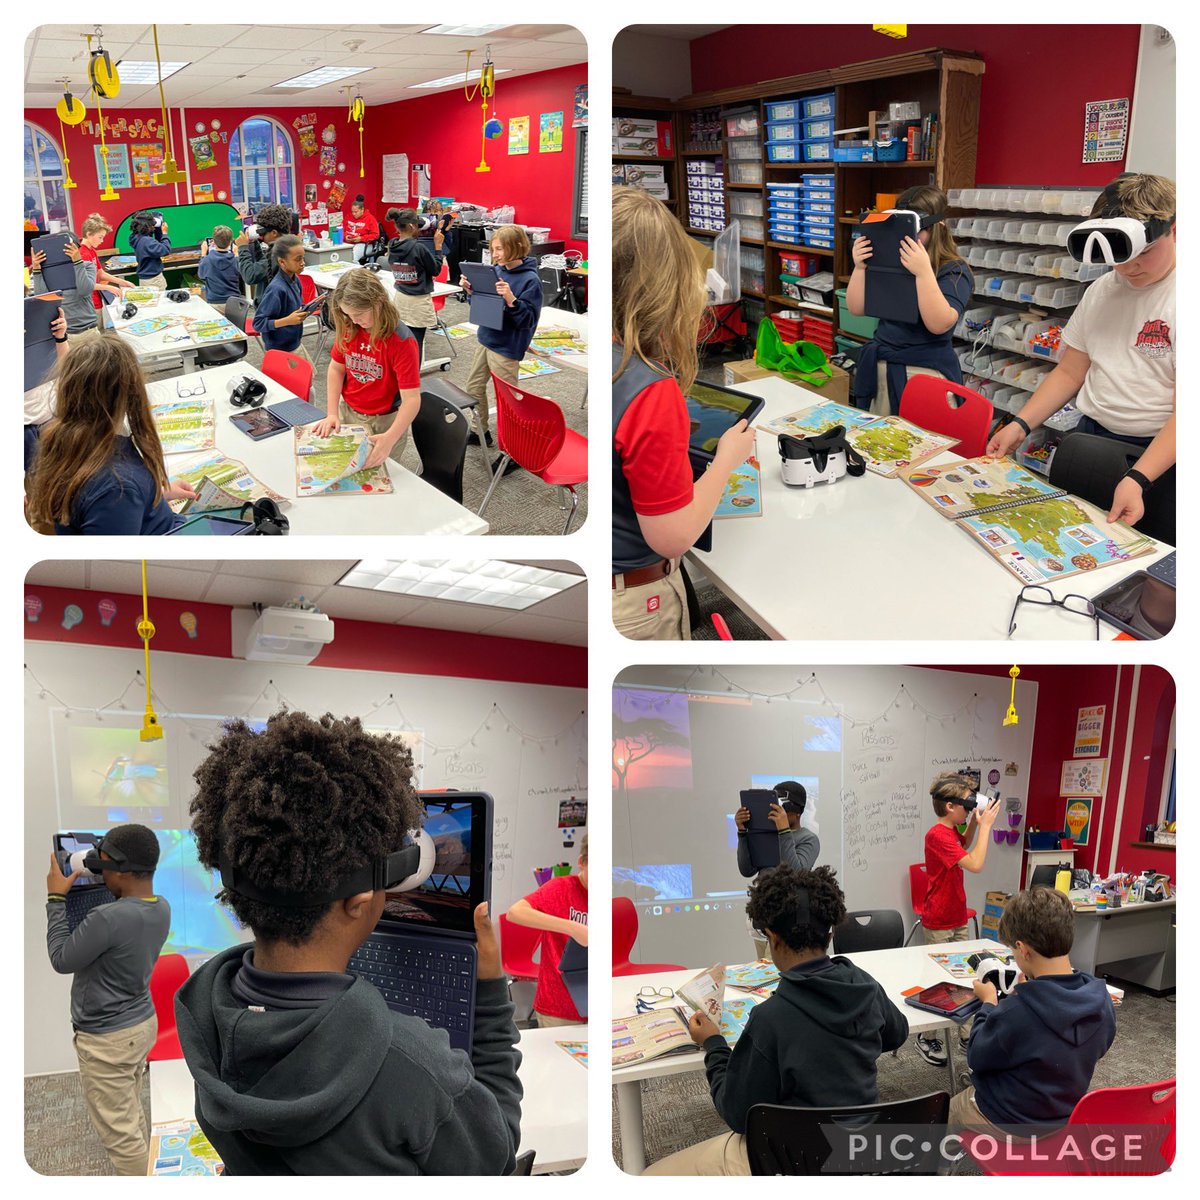 We’re visiting the Grand Canyon, New York, Italy, Brazil and many other places today using VR Atlas! Thanks @Natalie_STEAM and @TeacherTammyF for this fun lesson before we head out on Spring Break! #woodwardway @WoodwardAcademy